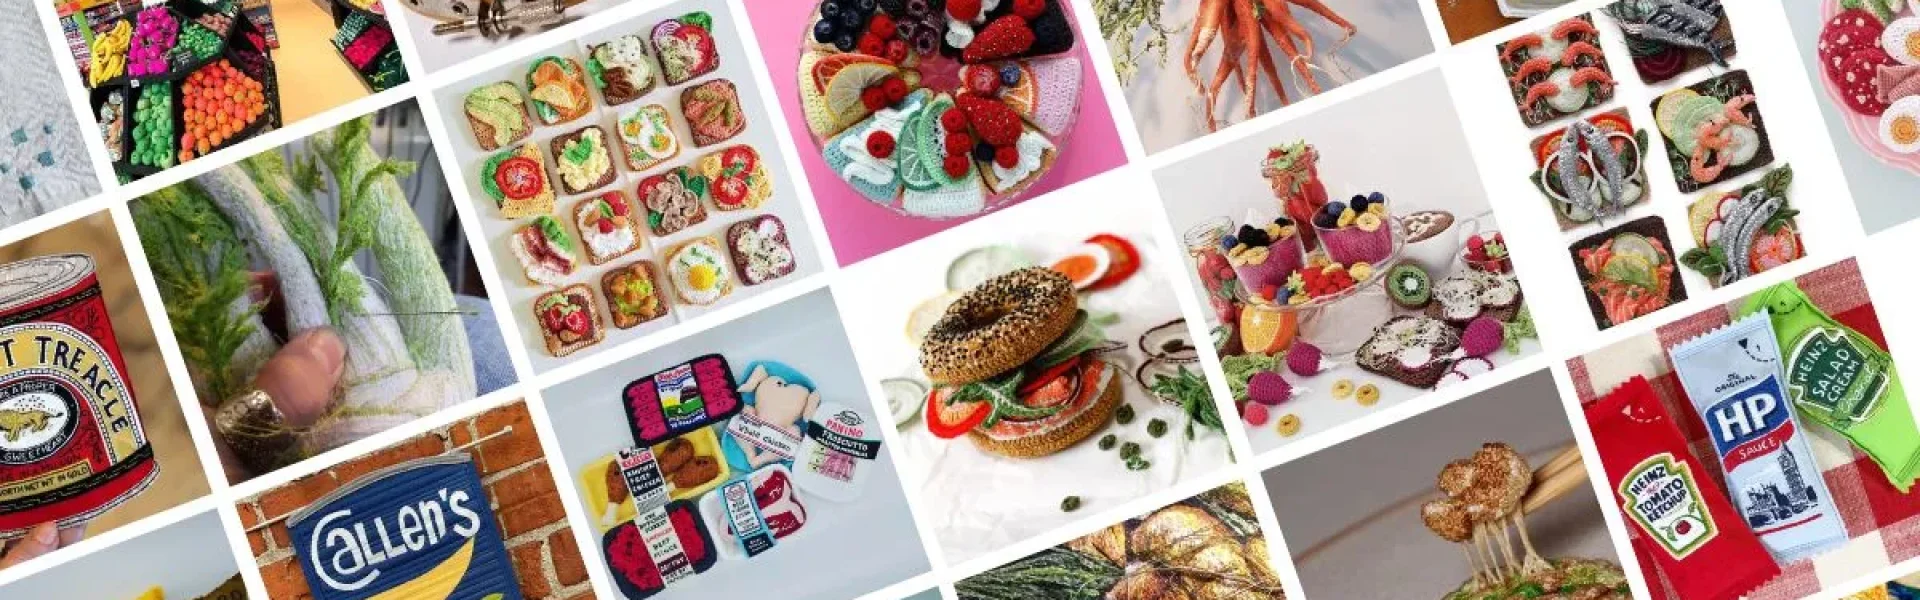 9 Textile Artists inspired by Food you HAVE to follow